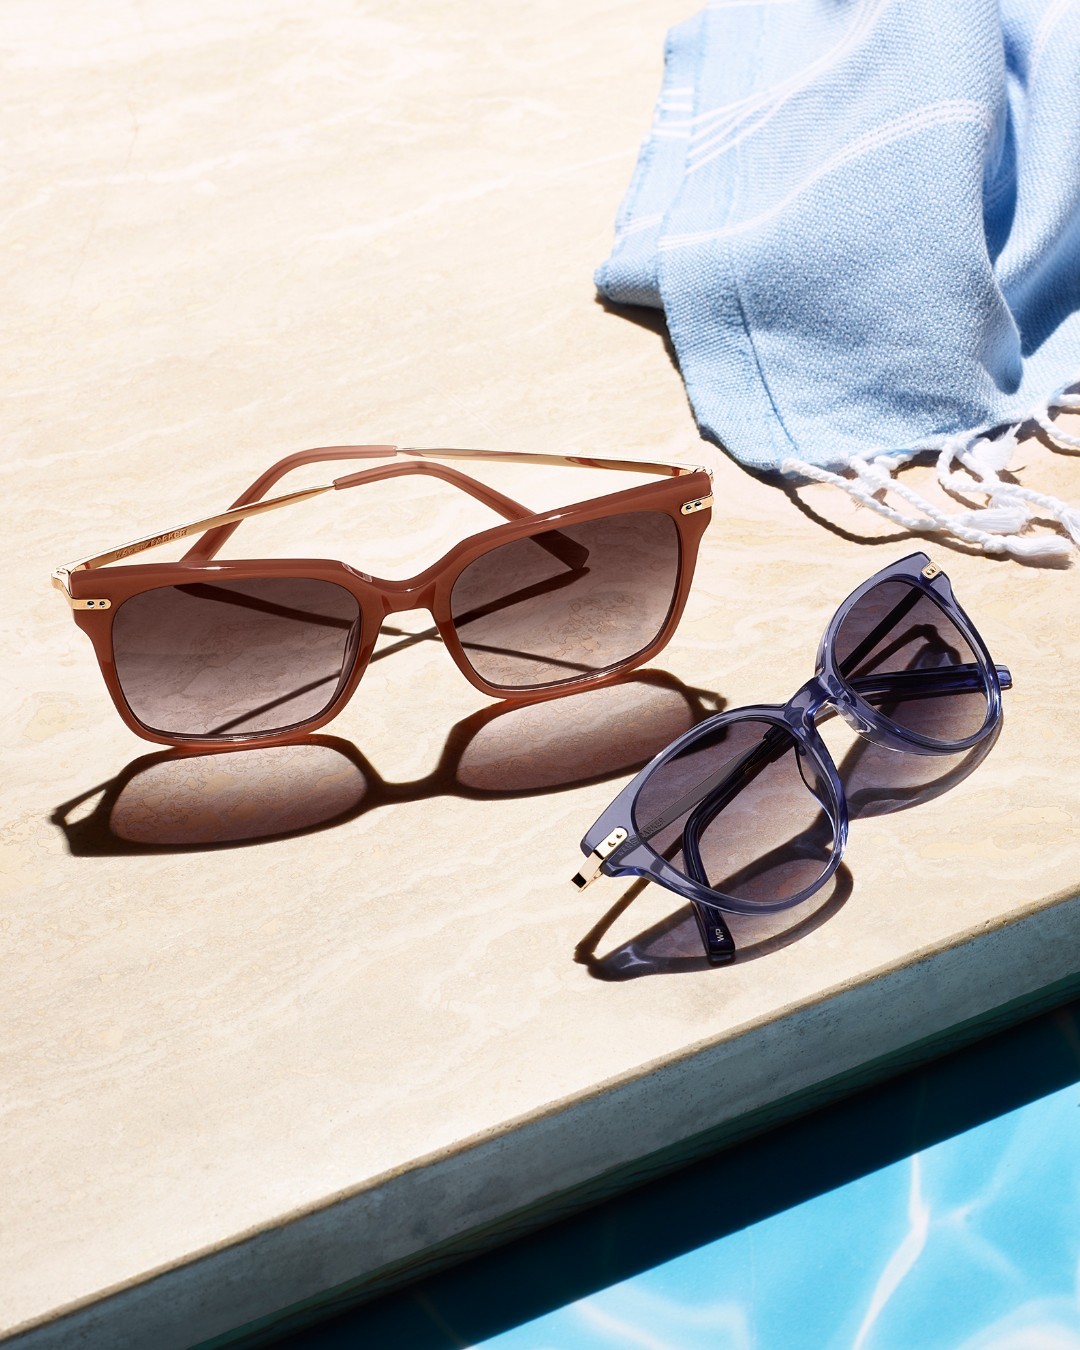 lifestyle image of two pairs of sunglasses in a pool scene. one pair is brown, the other is blue